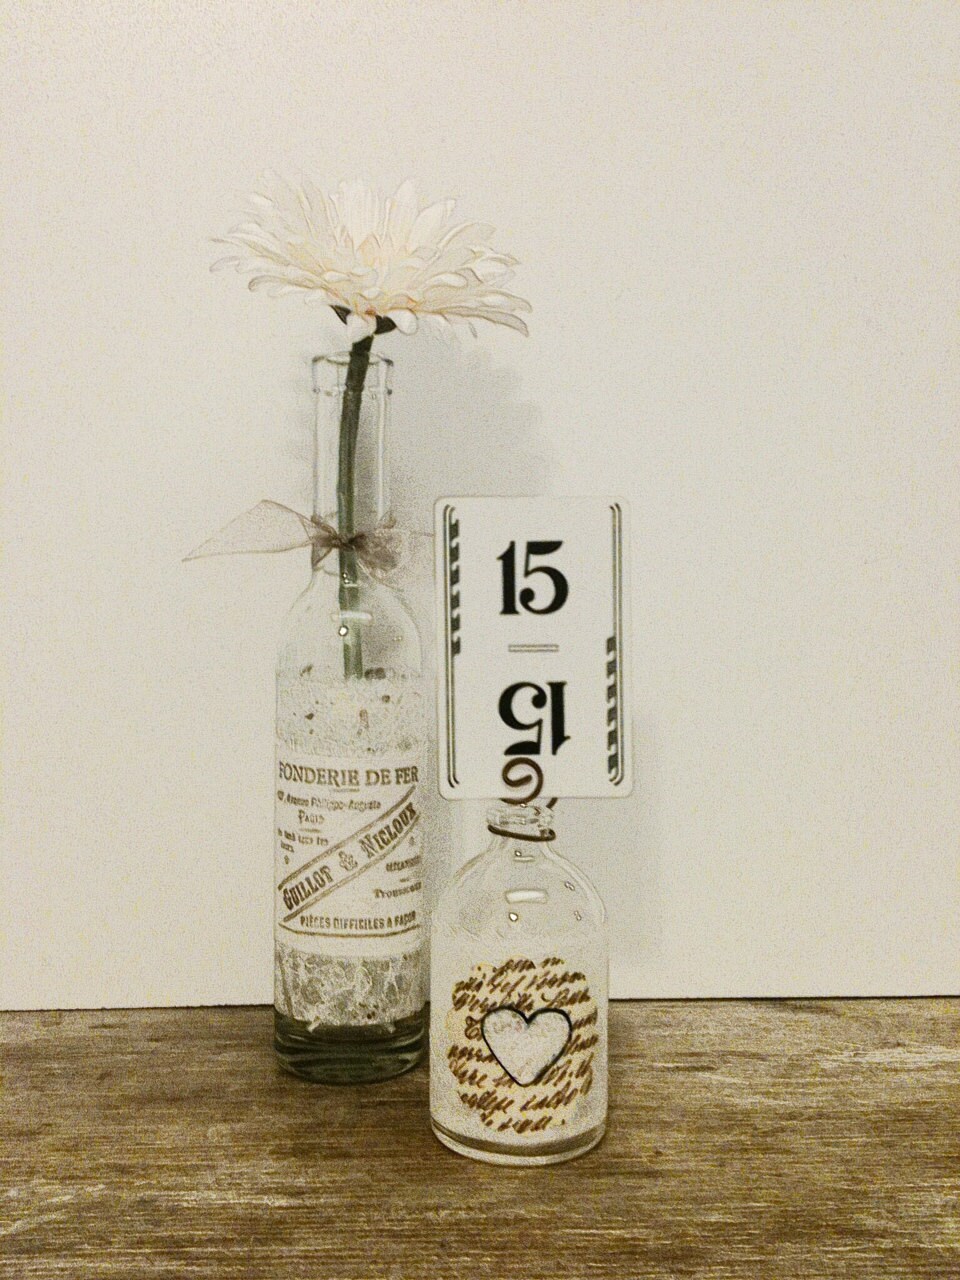 French Country Wedding, Table Numbers, Rustic Glam Wedding, Wedding Vase, Vintage Table Numbers, Small Glass Bottle, Shabby Chic Wedding